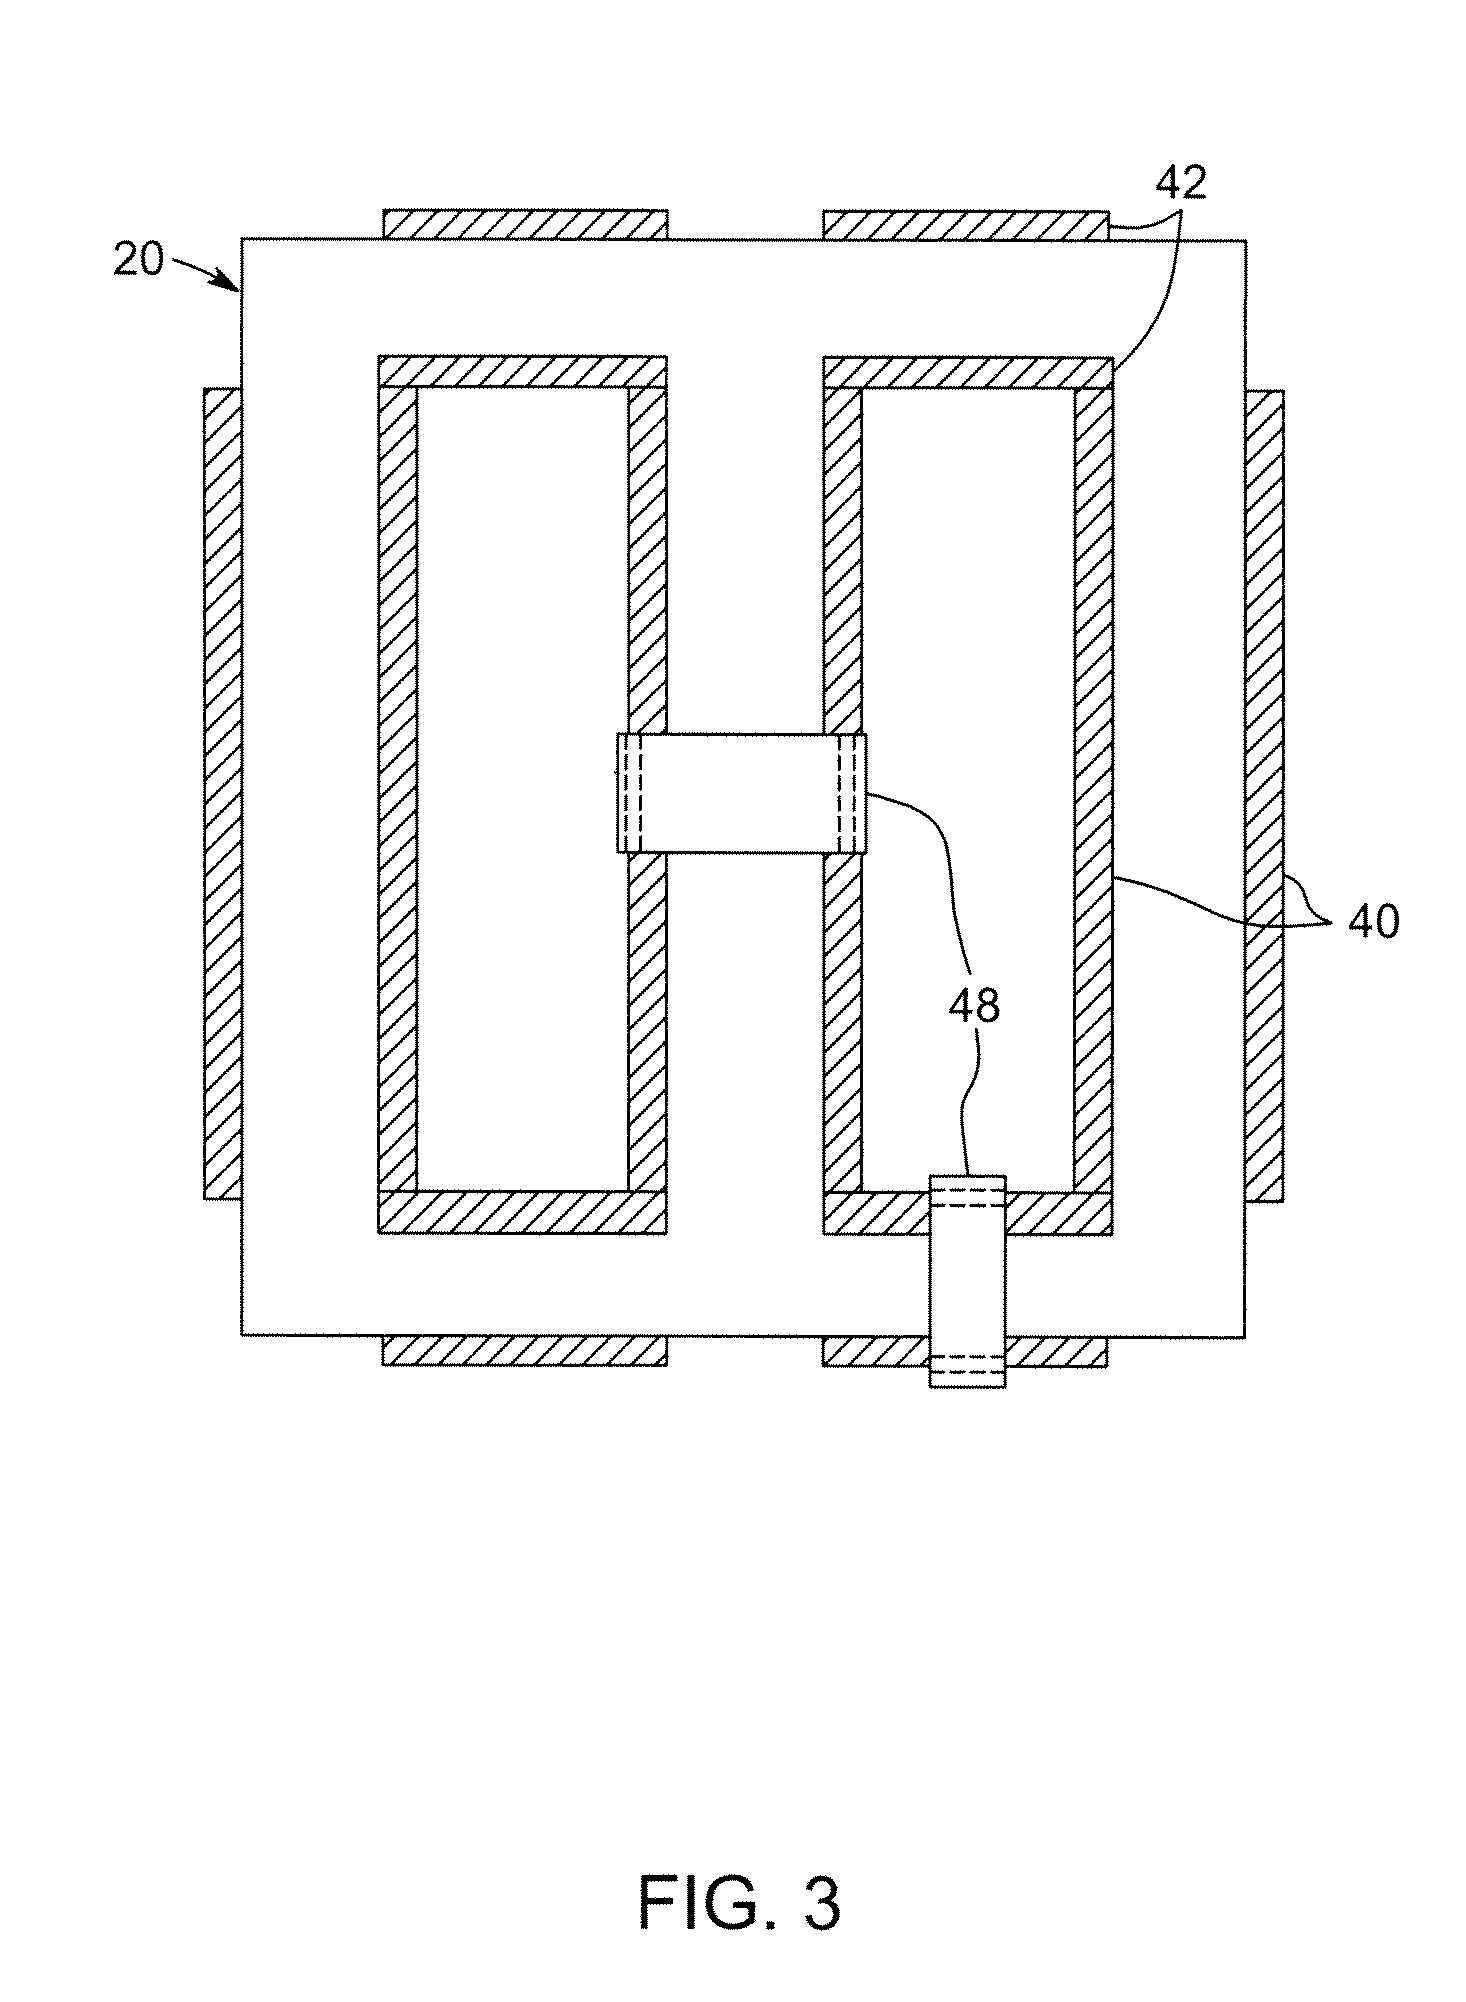 Liquid cooled magnetic component with indirect cooling for high frequency and high power applications